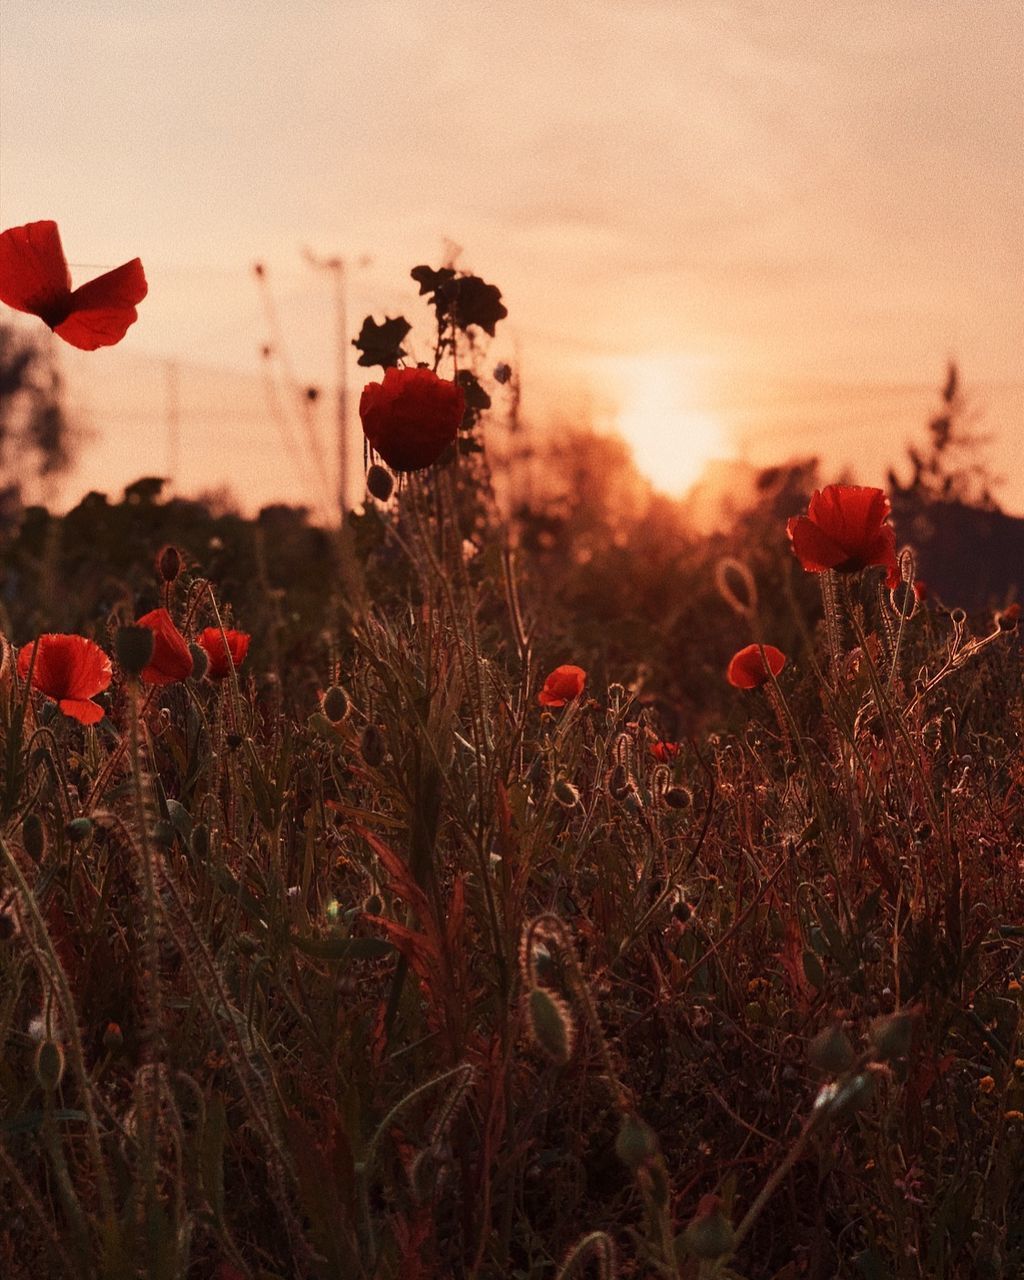 CLOSE-UP OF RED POPPY FLOWERS ON FIELD AGAINST SKY